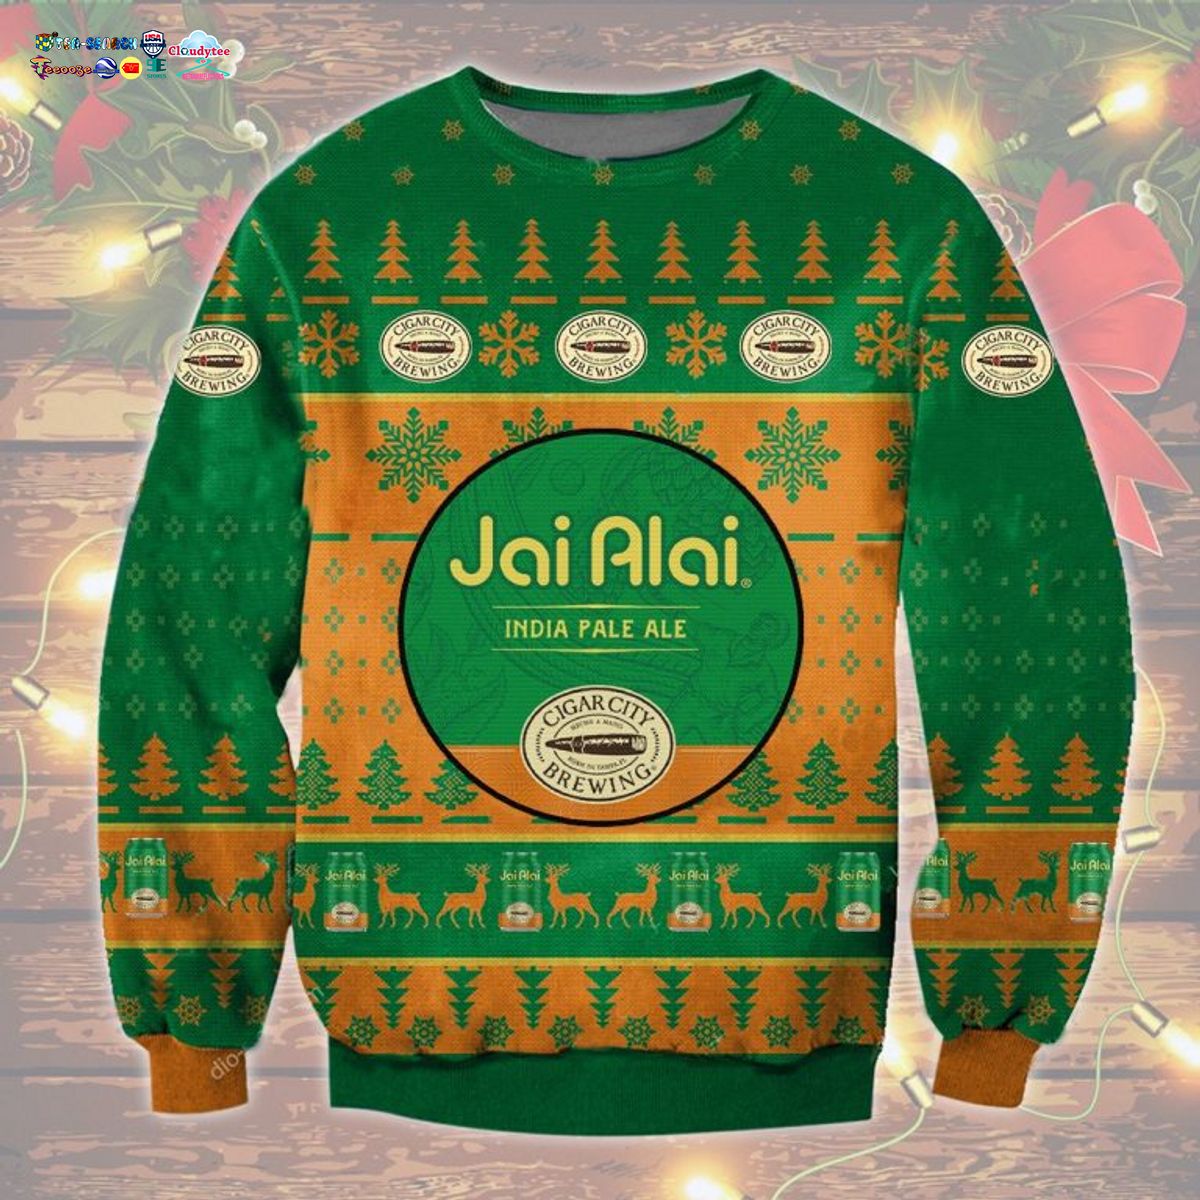 Jai Alai India Pale Ale Ugly Christmas Sweater - Such a charming picture.